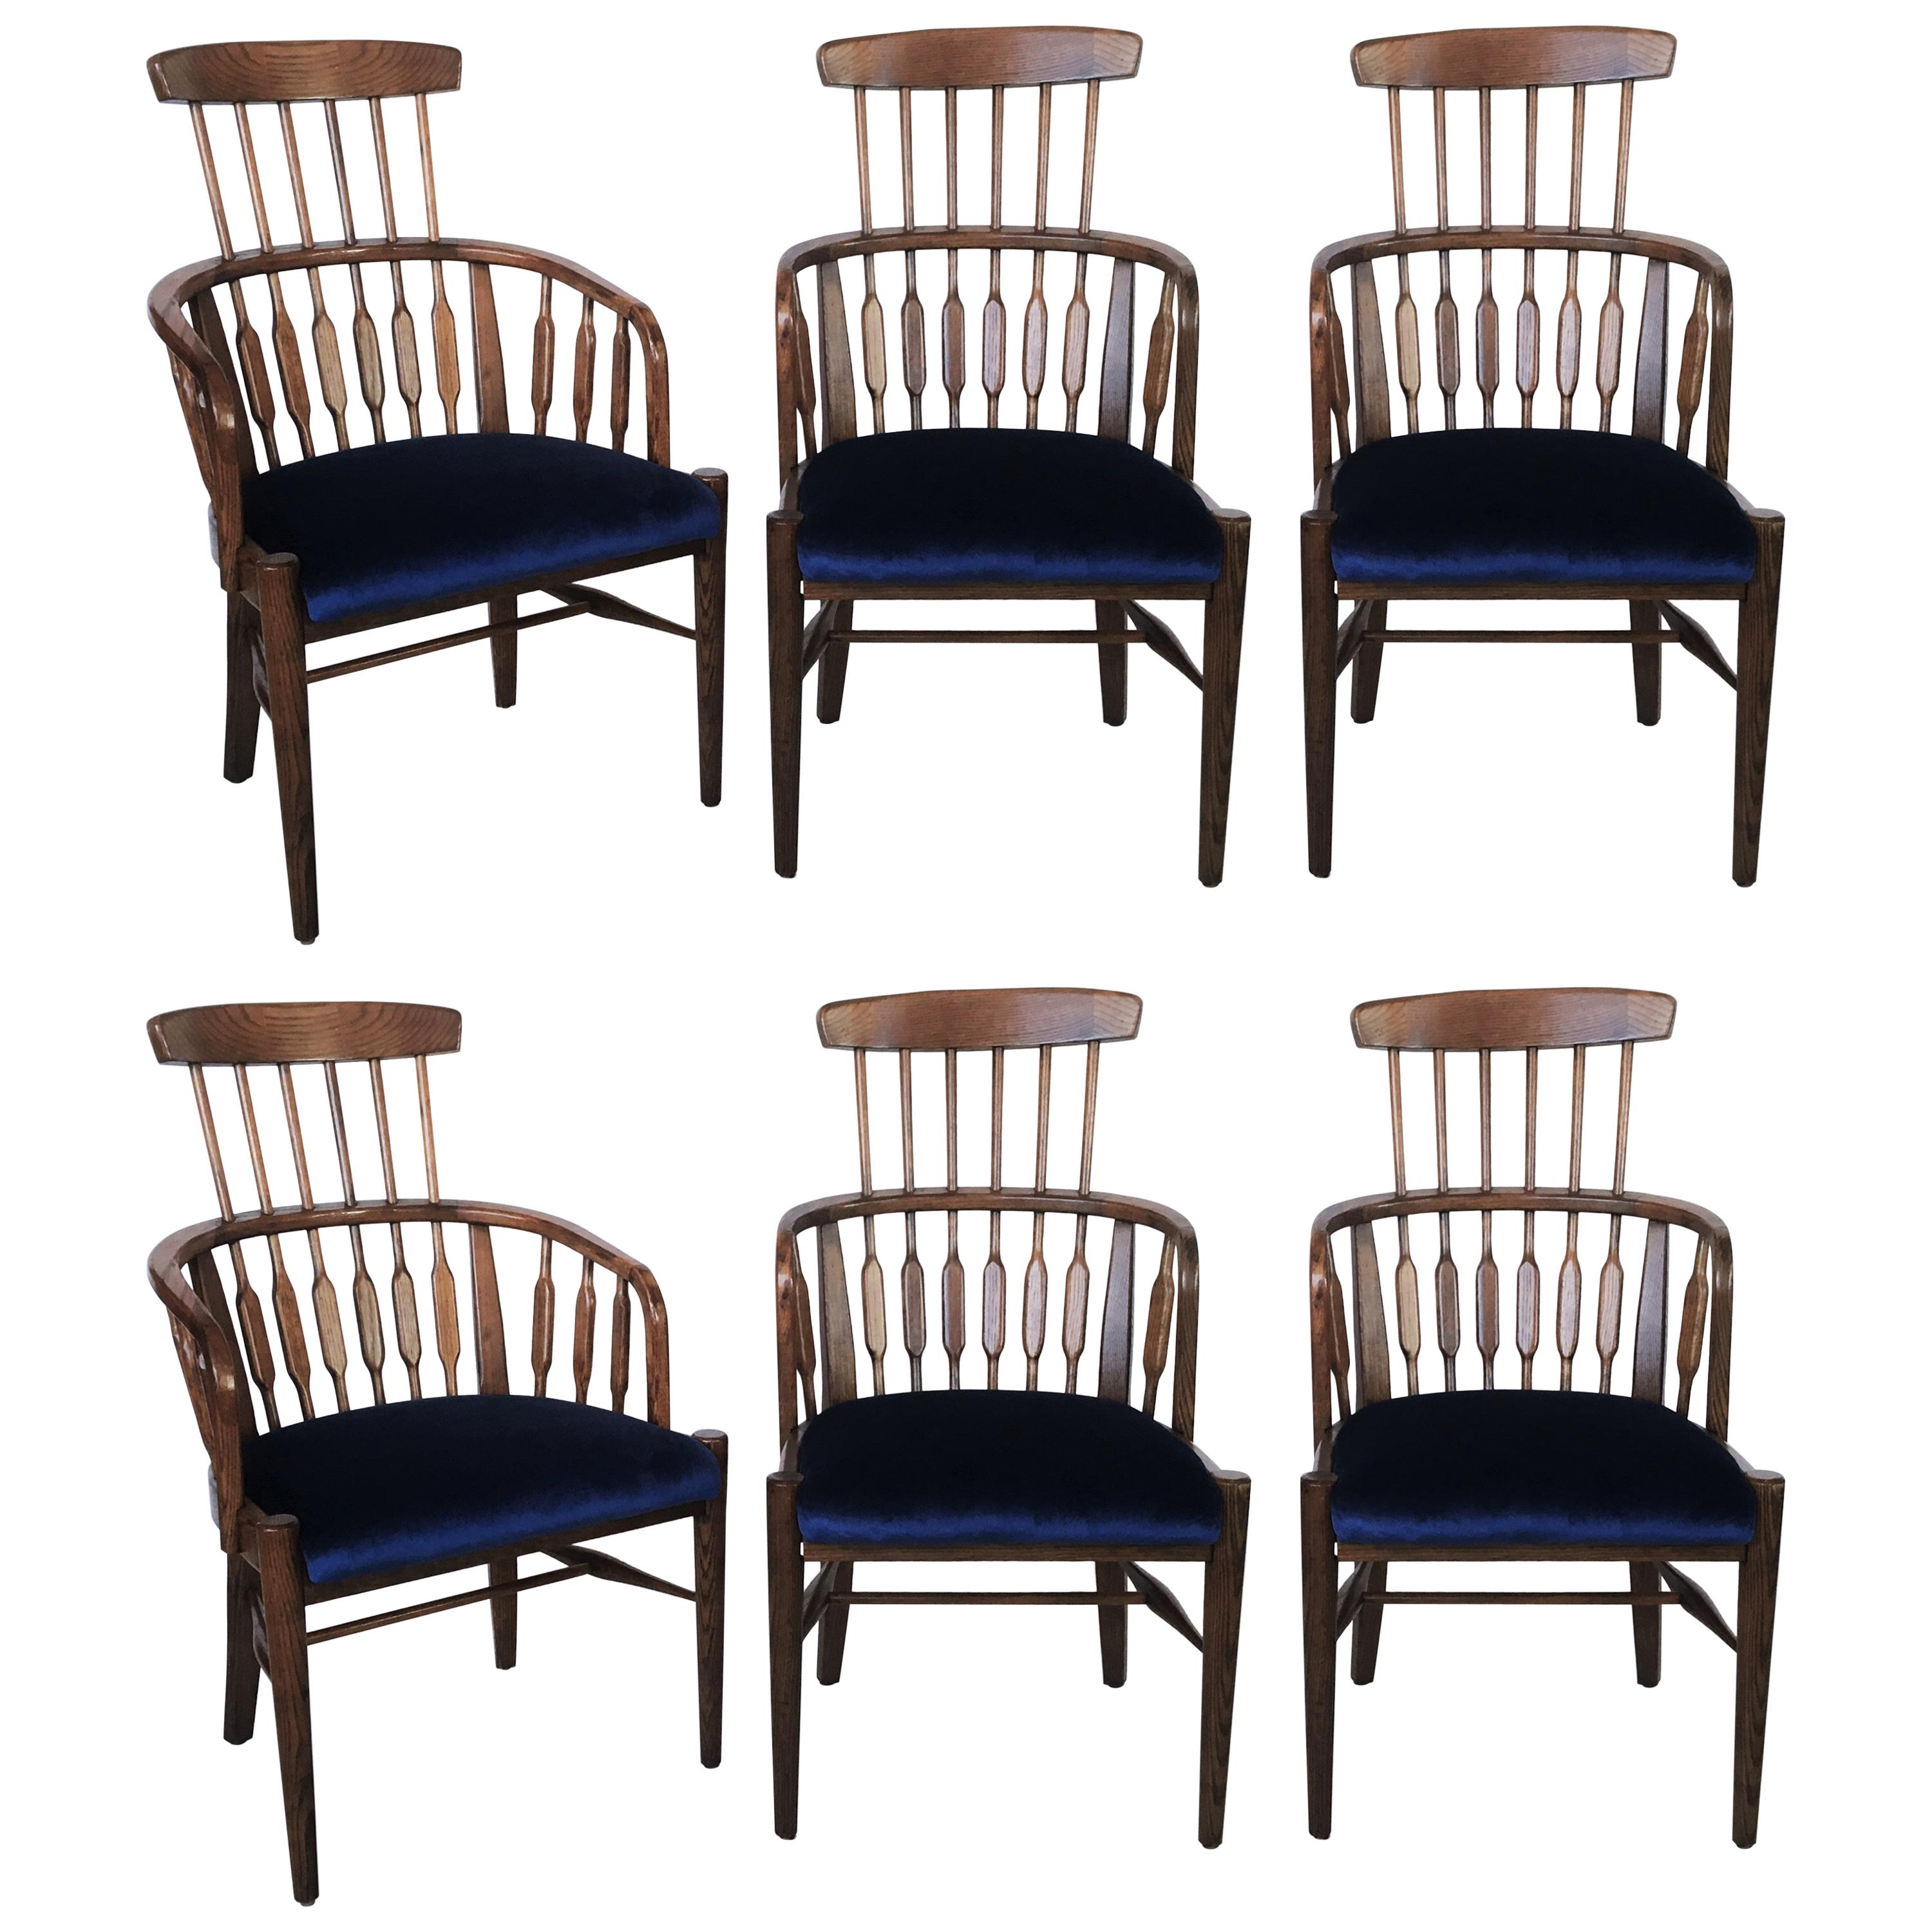 Six Mid-Century Modern Windsor Tall Back Dining Chairs